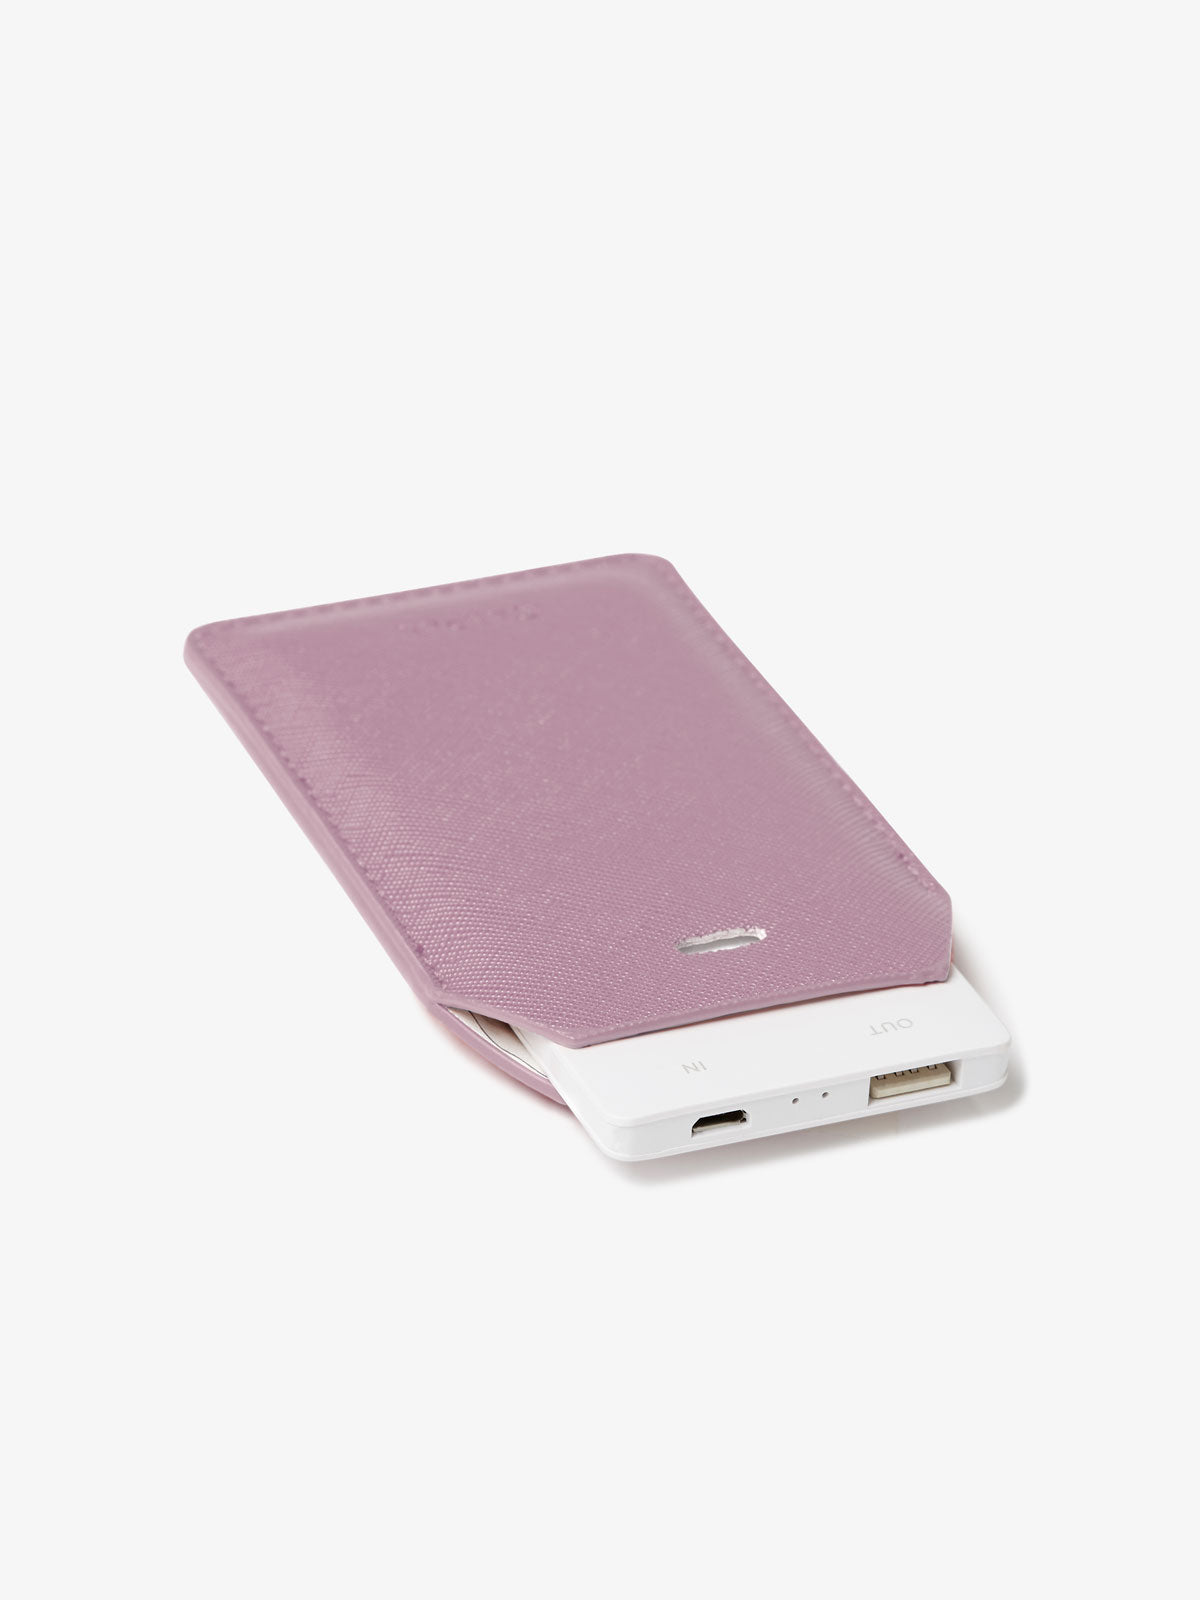 CALPAK luggage tag charger in lavender